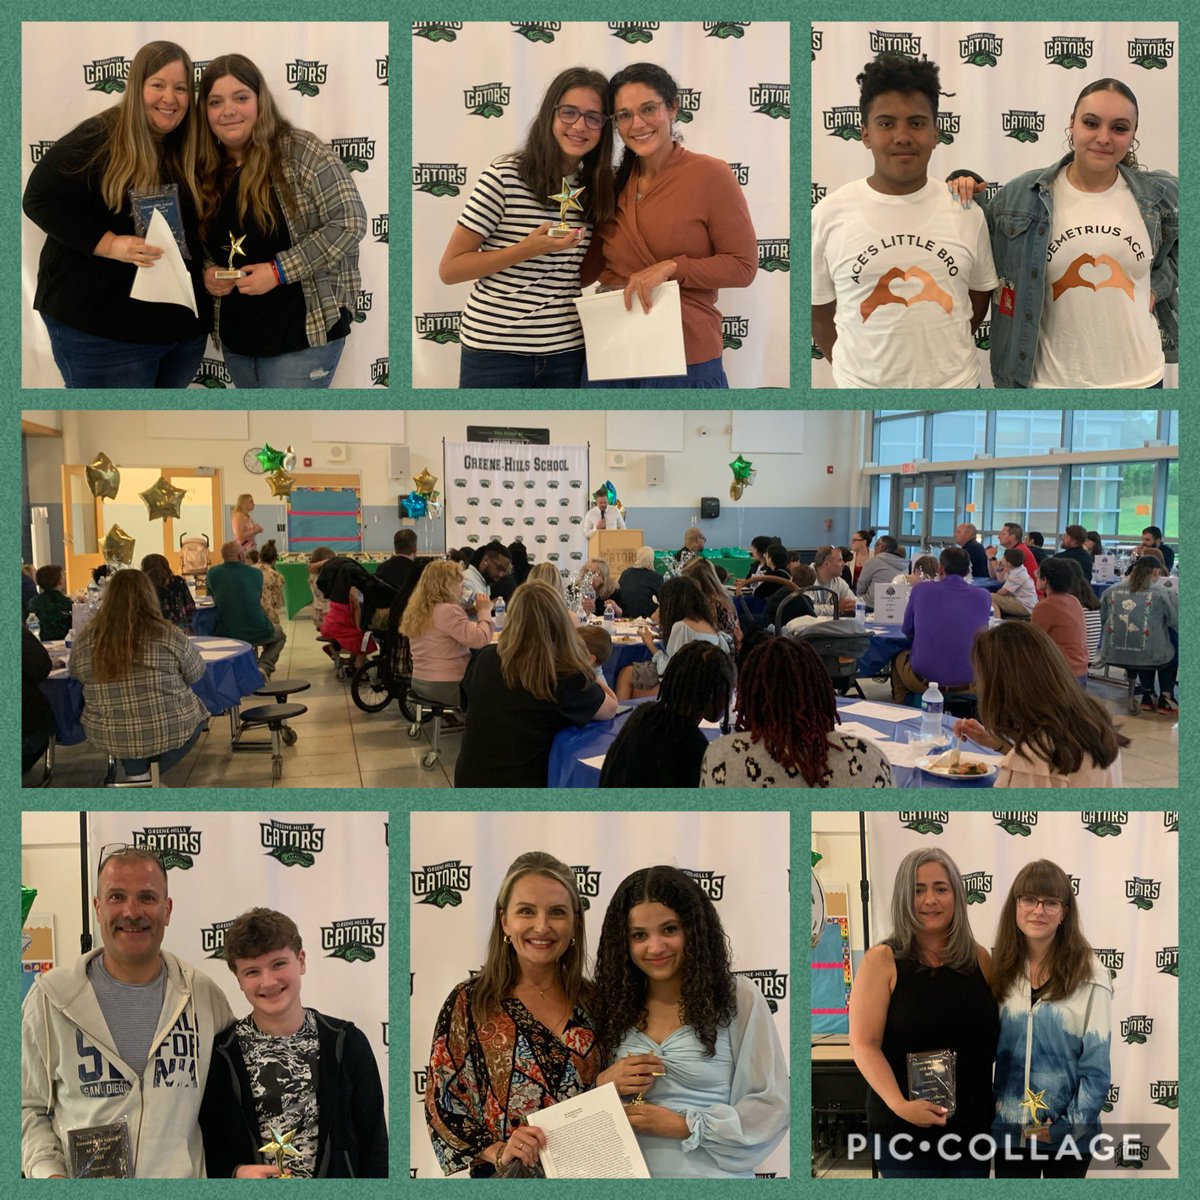 Amazing evening celebrating our GHS ACES at our annual ACES Banquet. All of the students shared heartfelt and meaningful connections they have developed with a caring adult who has positively impacted their life! ❤️🌟🐊🏆@GHillsGators @BristolCTSchool @kidsathope